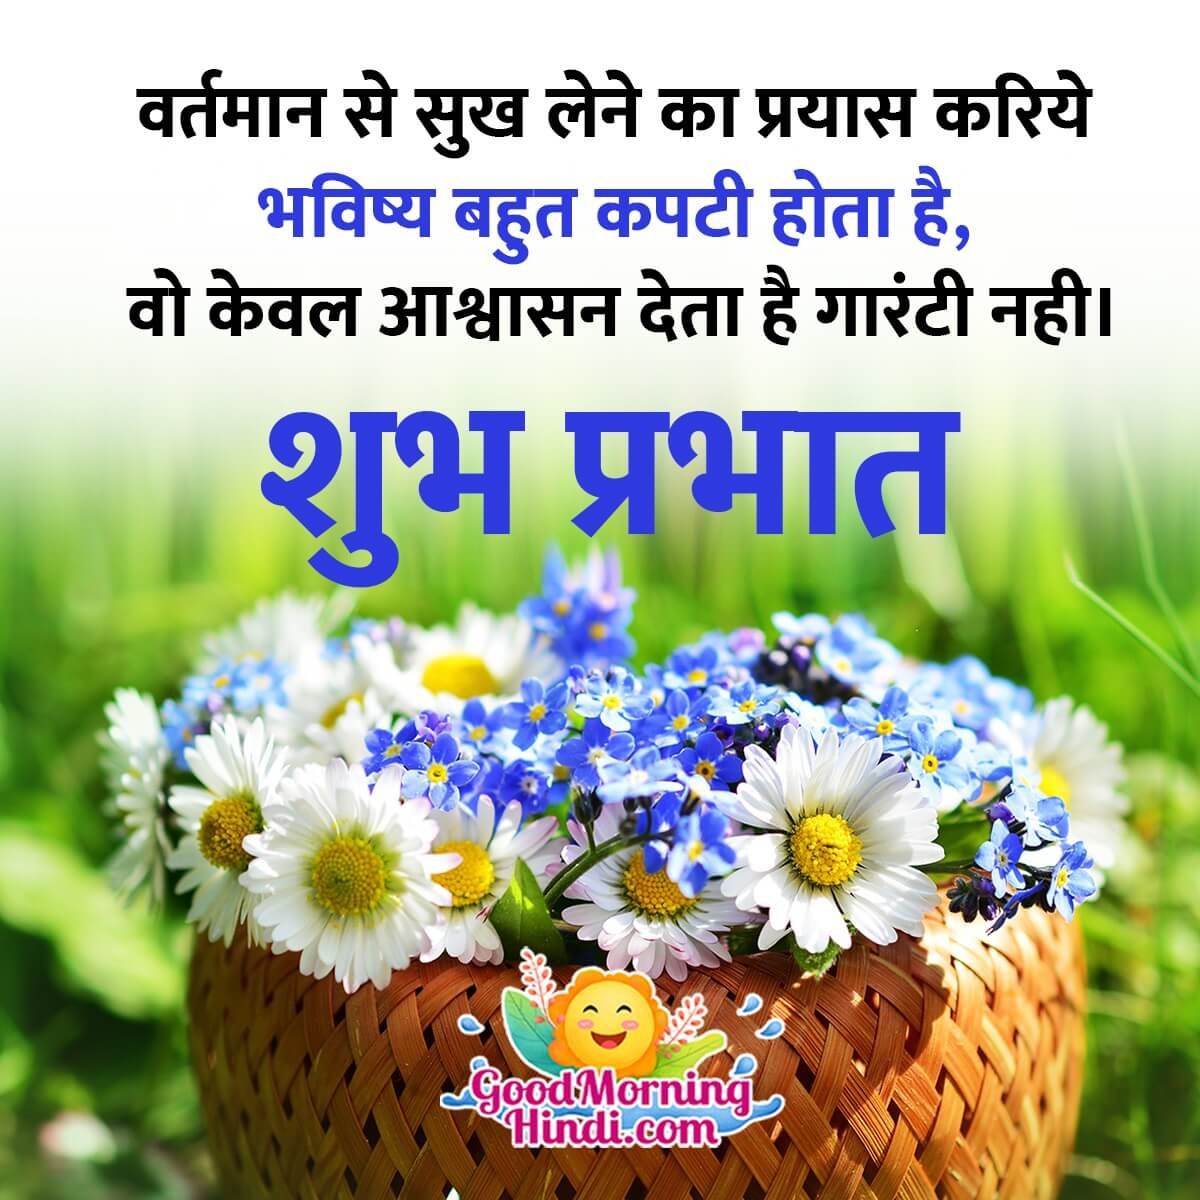 Best Shubh Prabhat Quote For Whatsapp